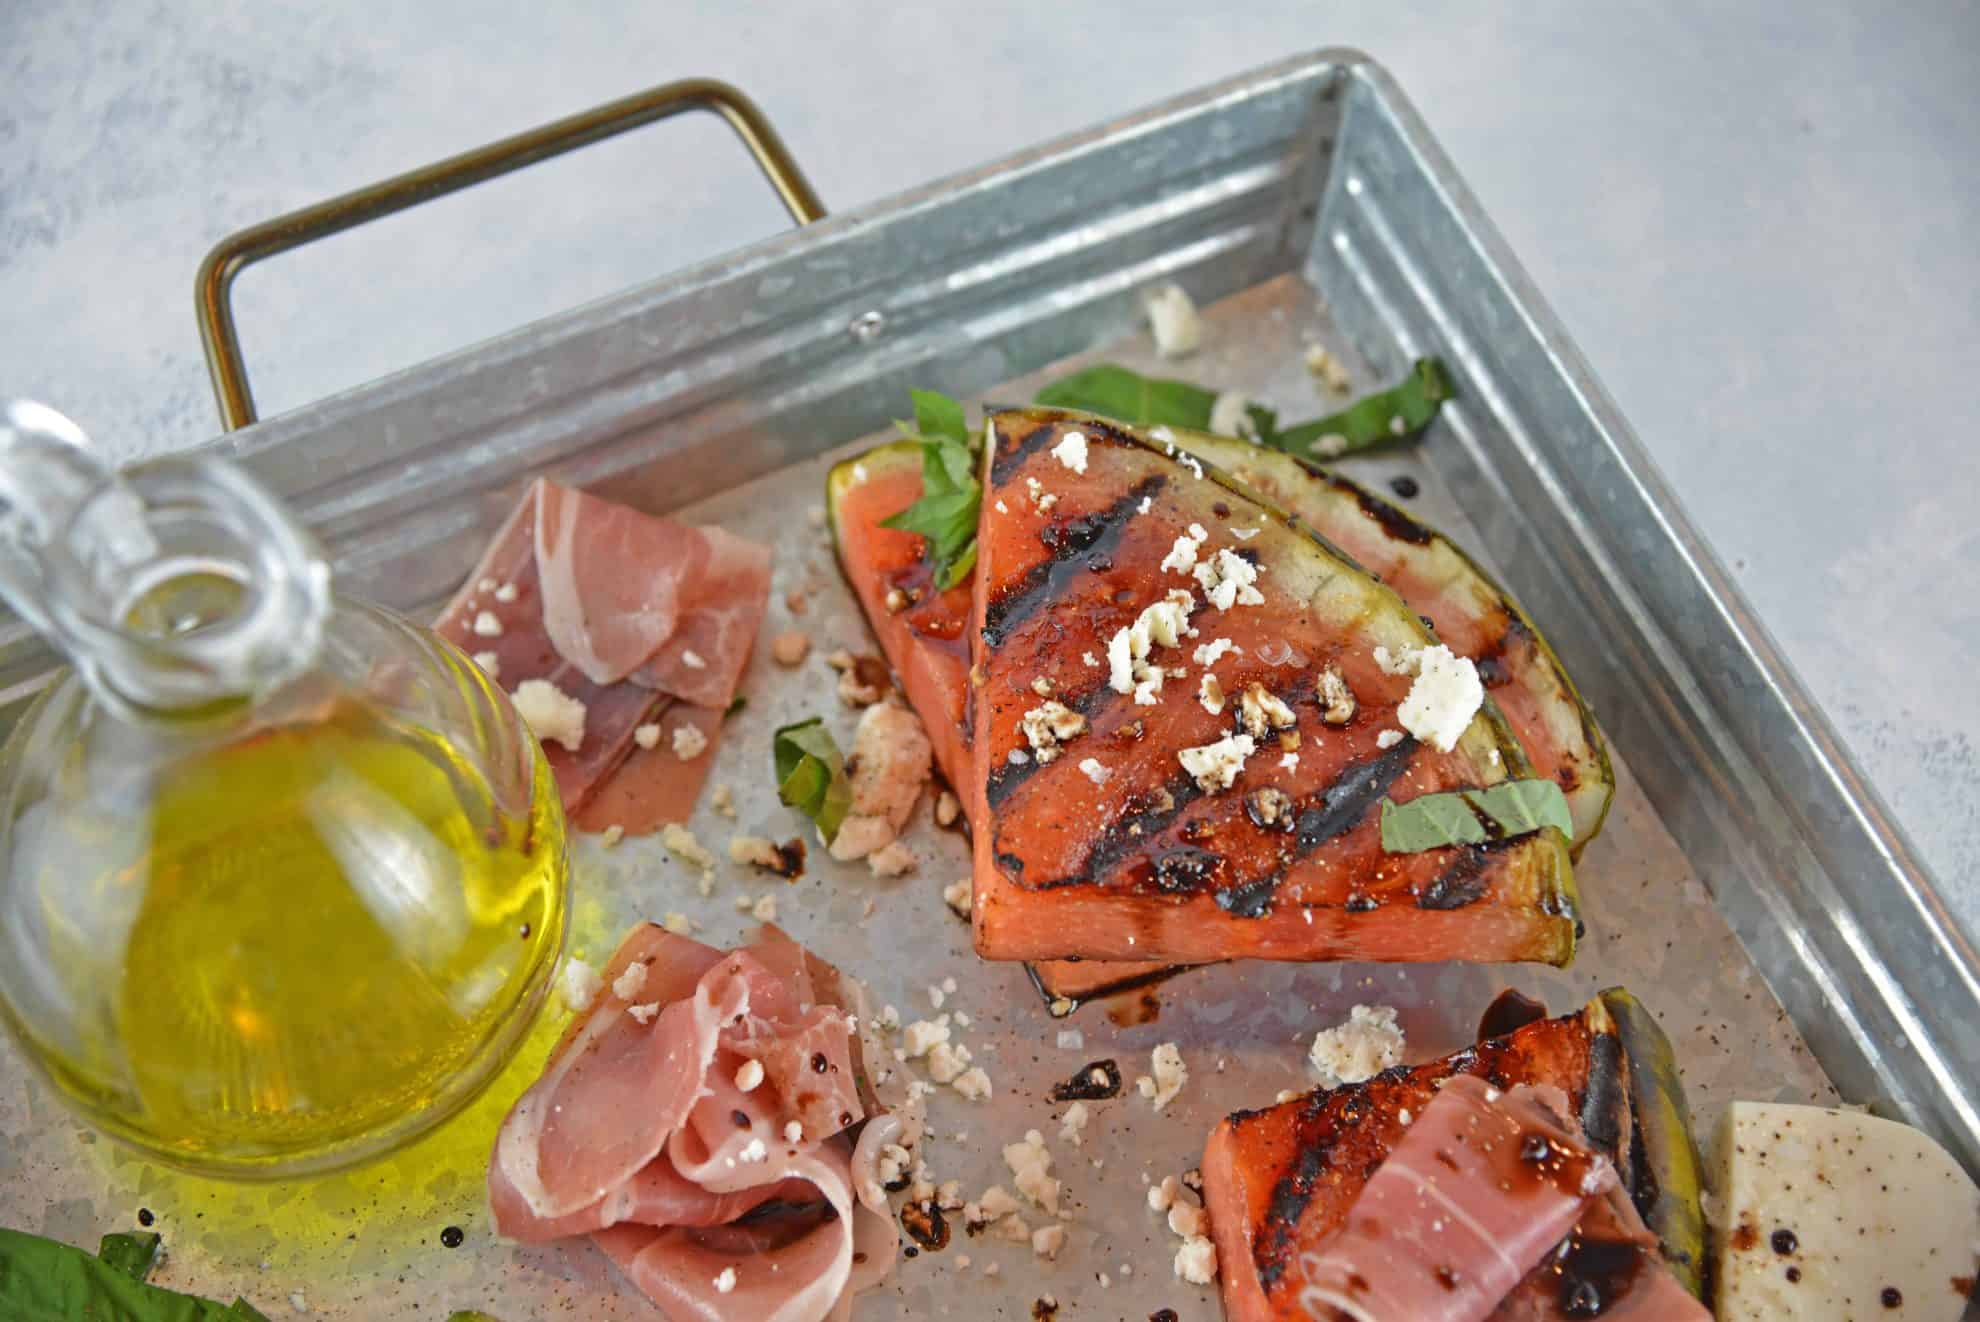 Grilled Watermelon Steaks with balsamic reduction and feta cheese are an easy BBQ side dish. Caramelized, juicy watermelon with savory cheese and sticky reduction is delicious! #grilledwatermelon #watermelonrecipes www.savoryexperiments.com 